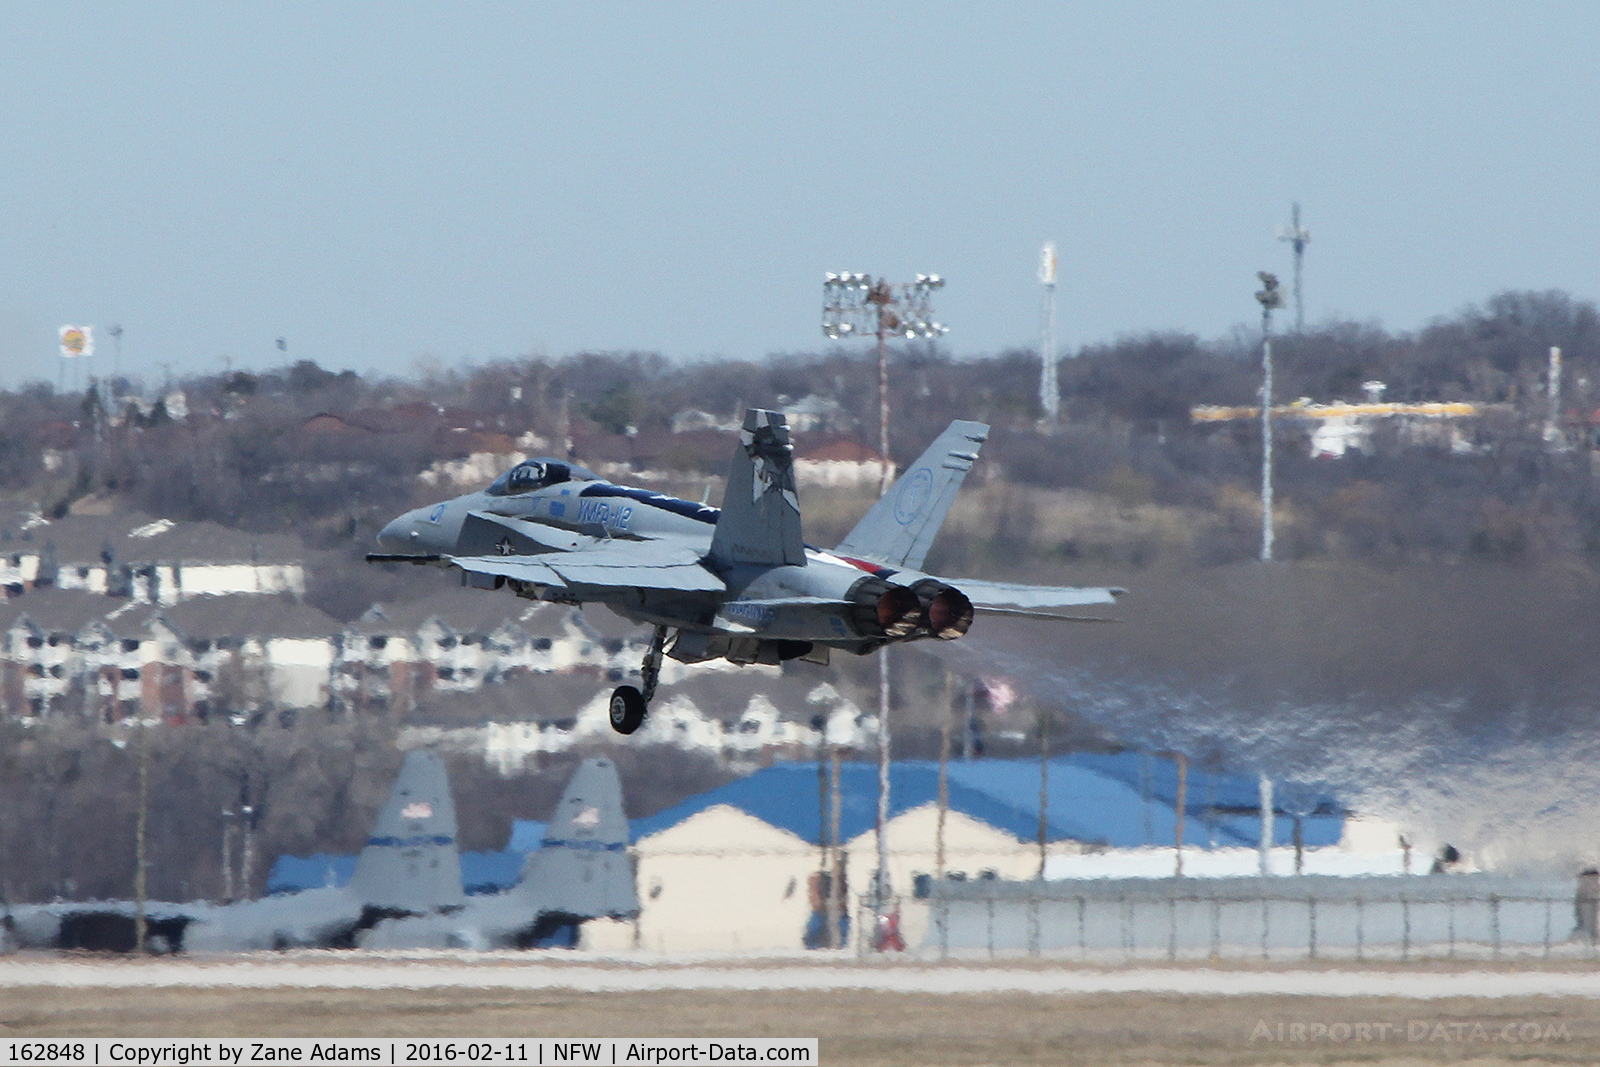 162848, McDonnell Douglas F/A-18A++ Hornet C/N 374/A313, F/A-18 with gear trouble, NAS Fort Worth